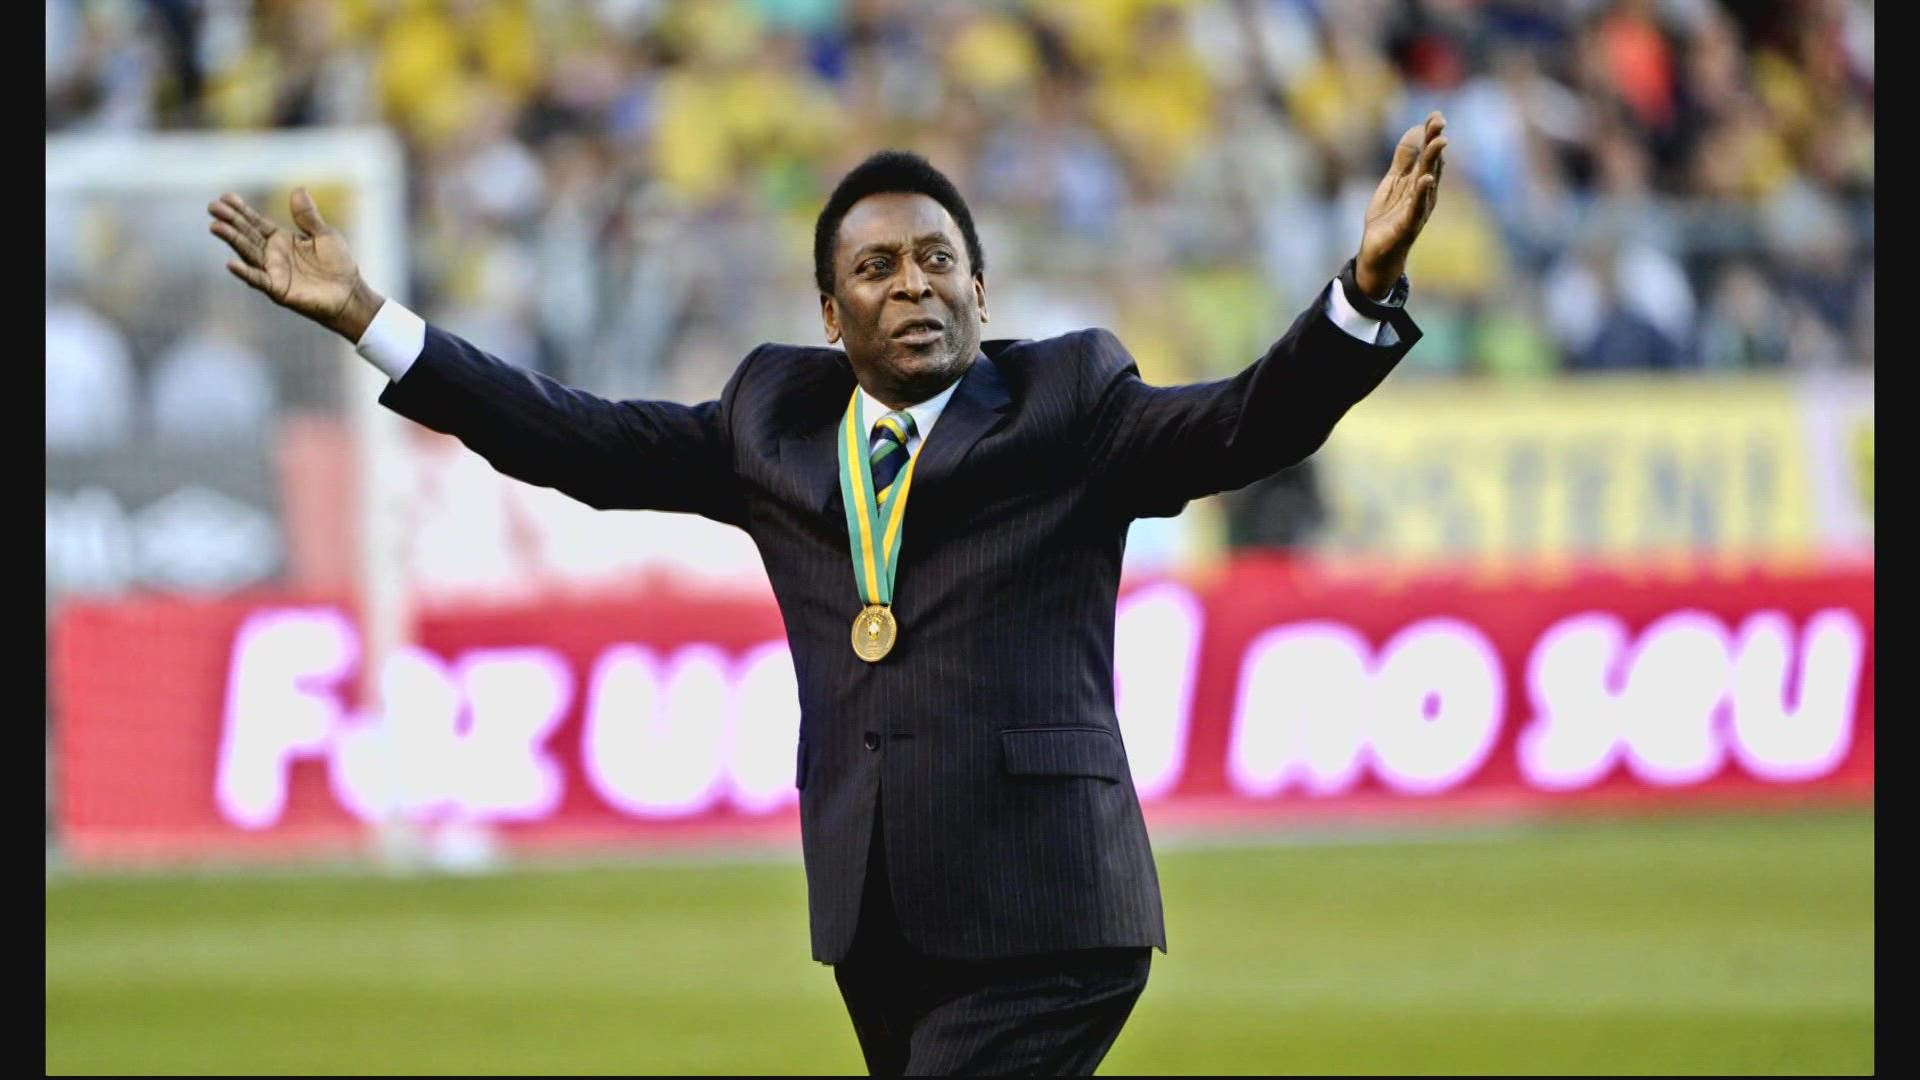 Pele was admitted to a hospital a month ago for a respiratory infection and re-evaluation of Chemotherapy treatment. he will forever be known as one of the greatest